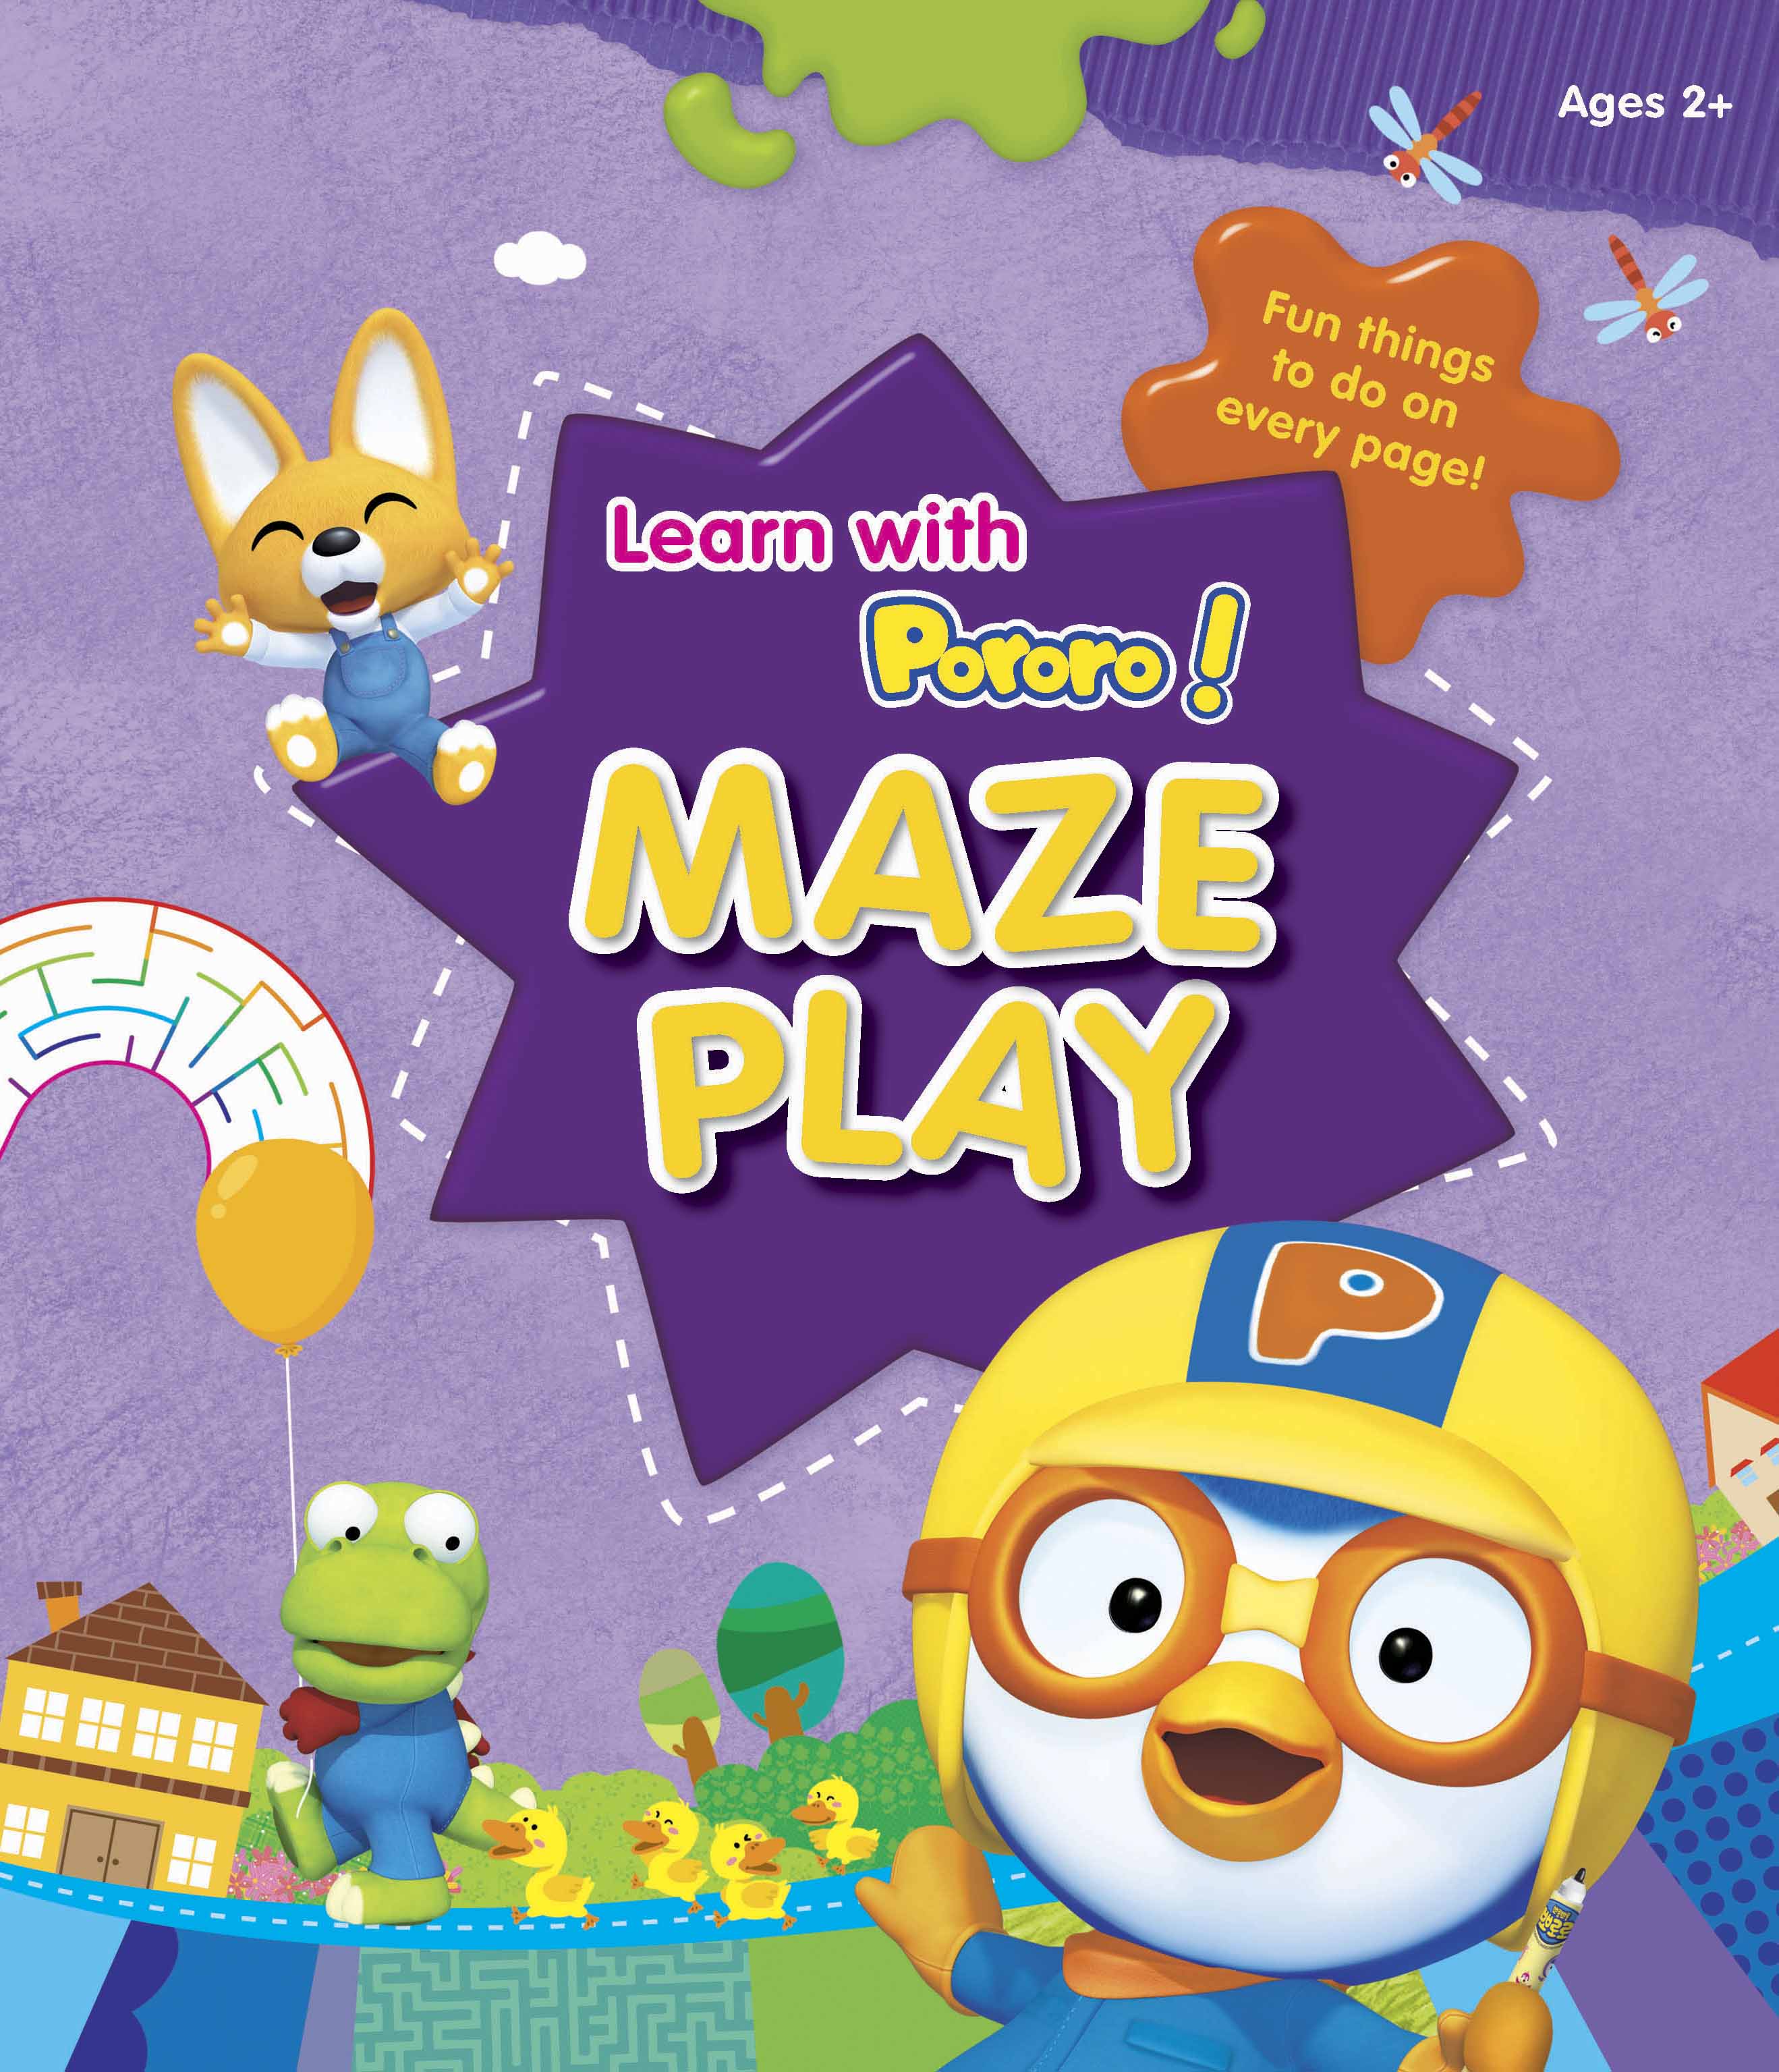 Learn with Pororo! Maze Play